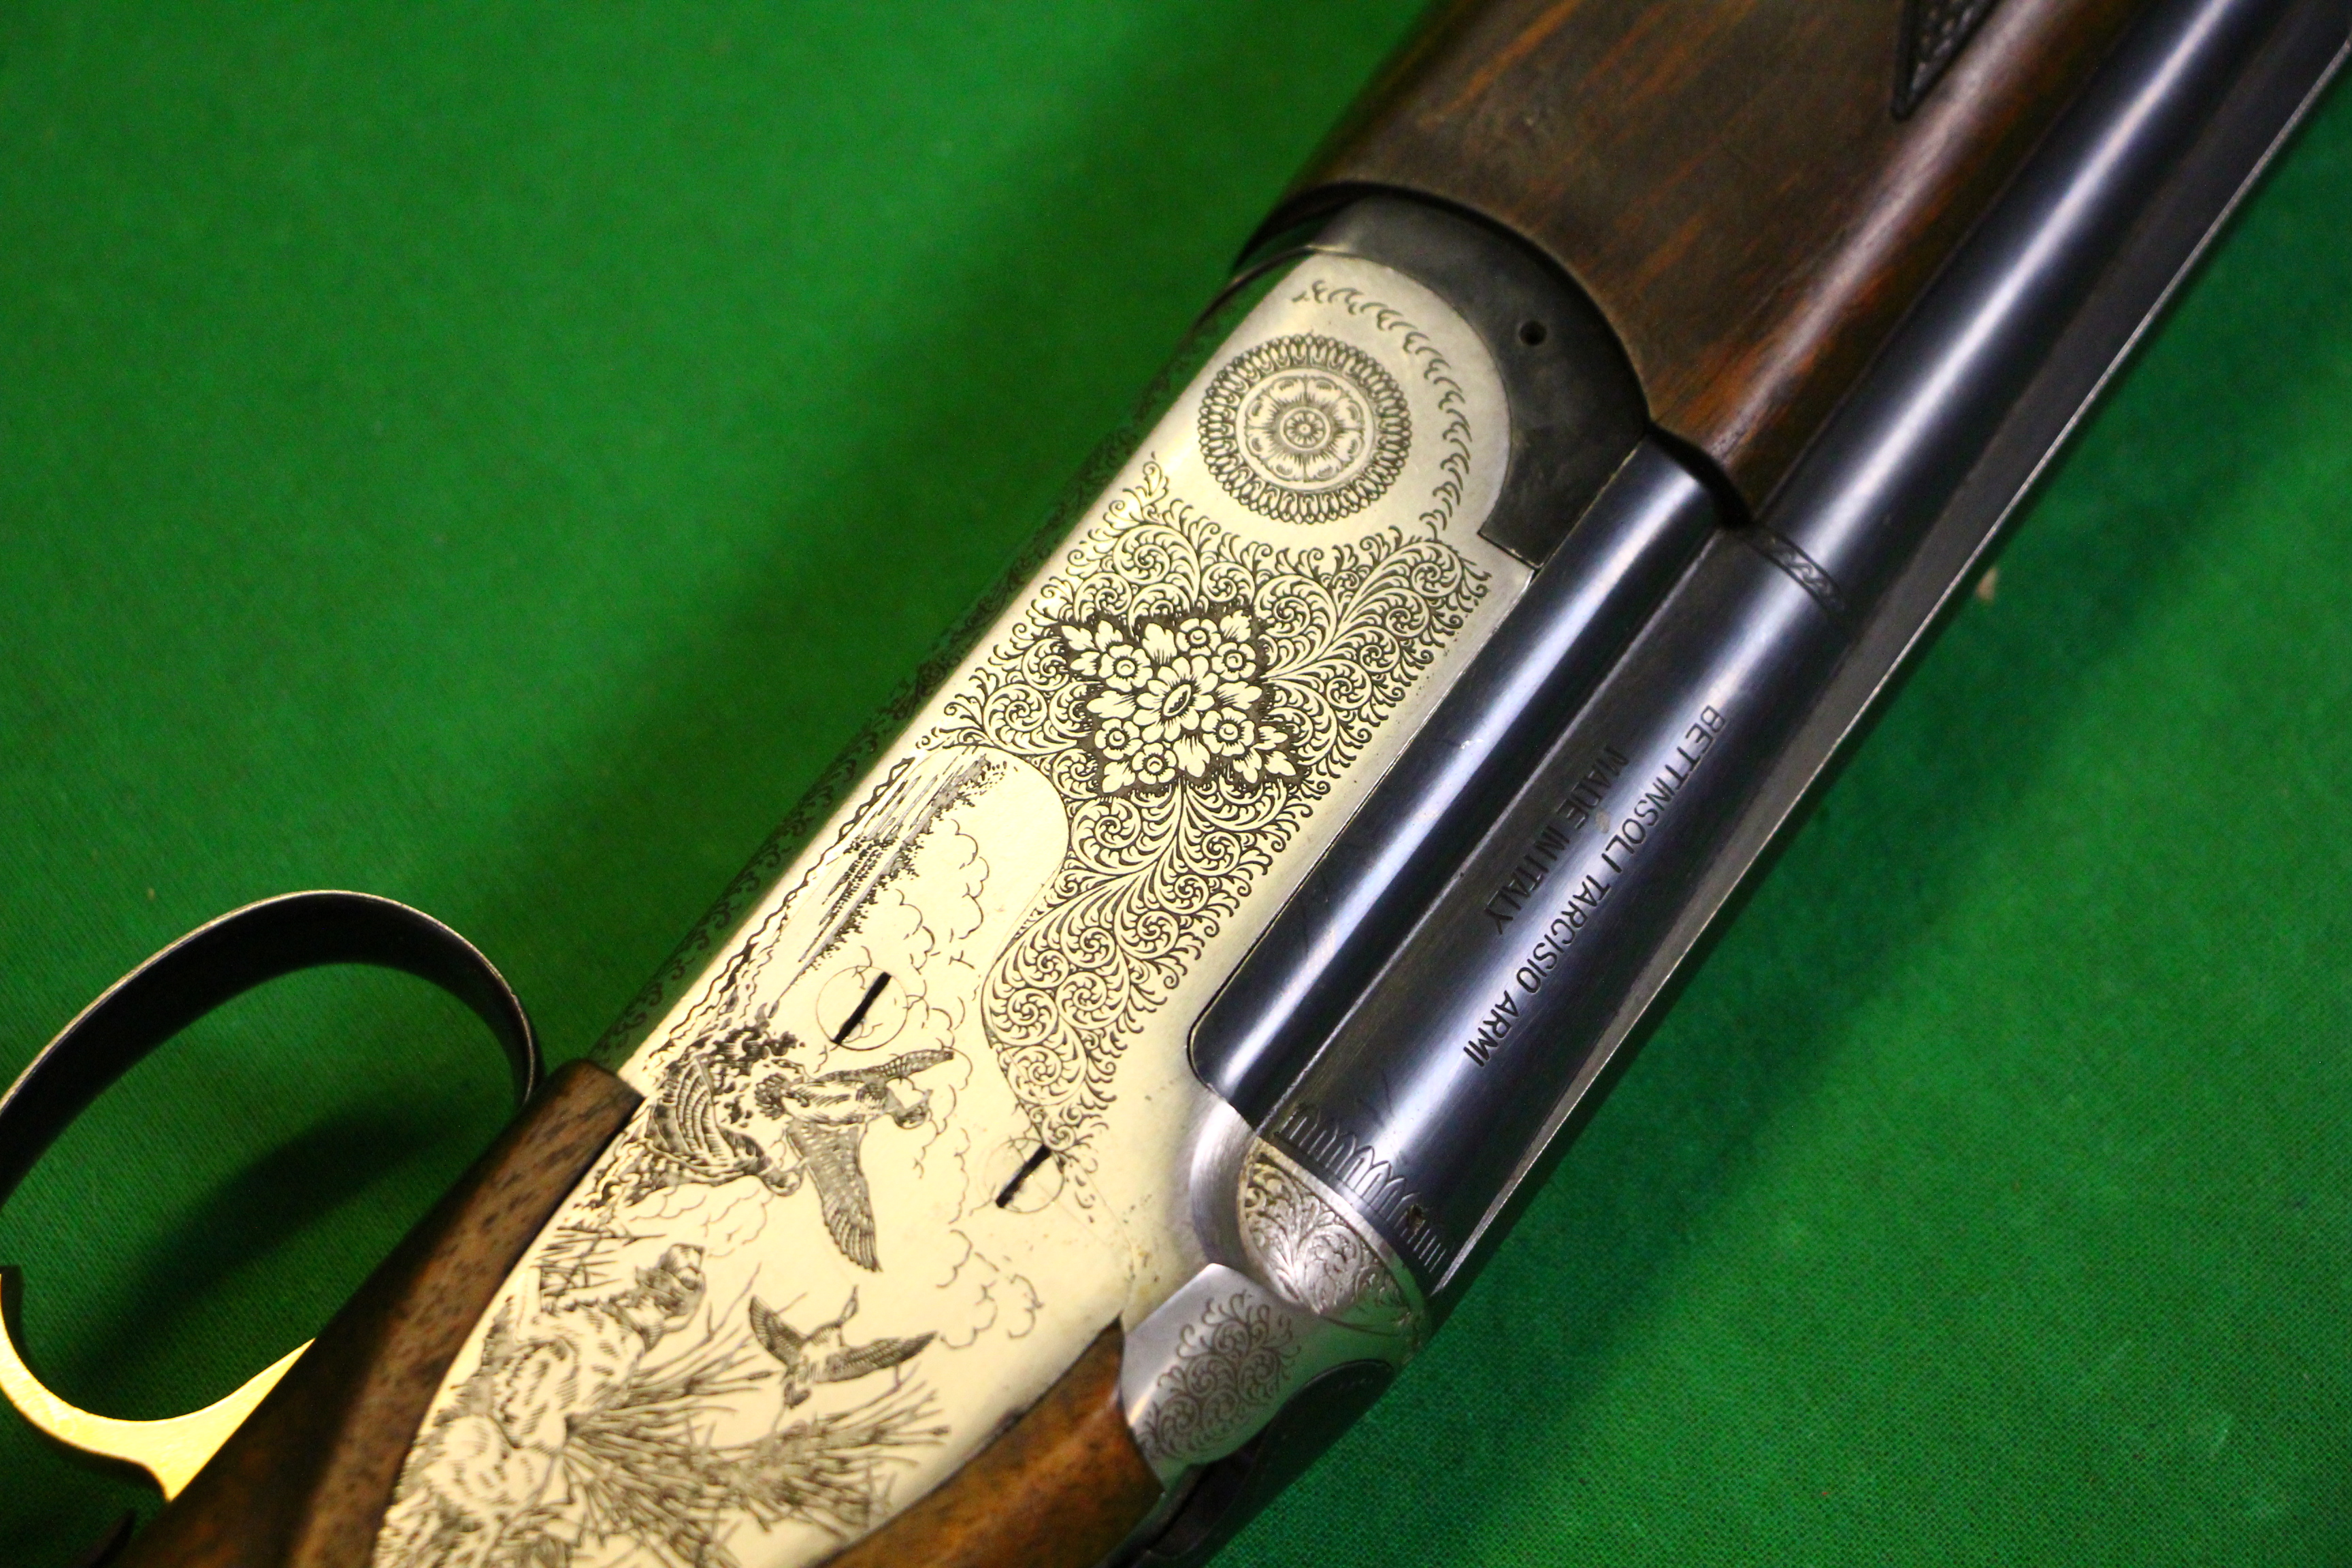 BETTINSOLI 12 BORE OVER AND UNDER SHOTGUN #98200 5 CHOKES AND KEY - (ALL GUNS TO BE INSPECTED AND - Image 9 of 13